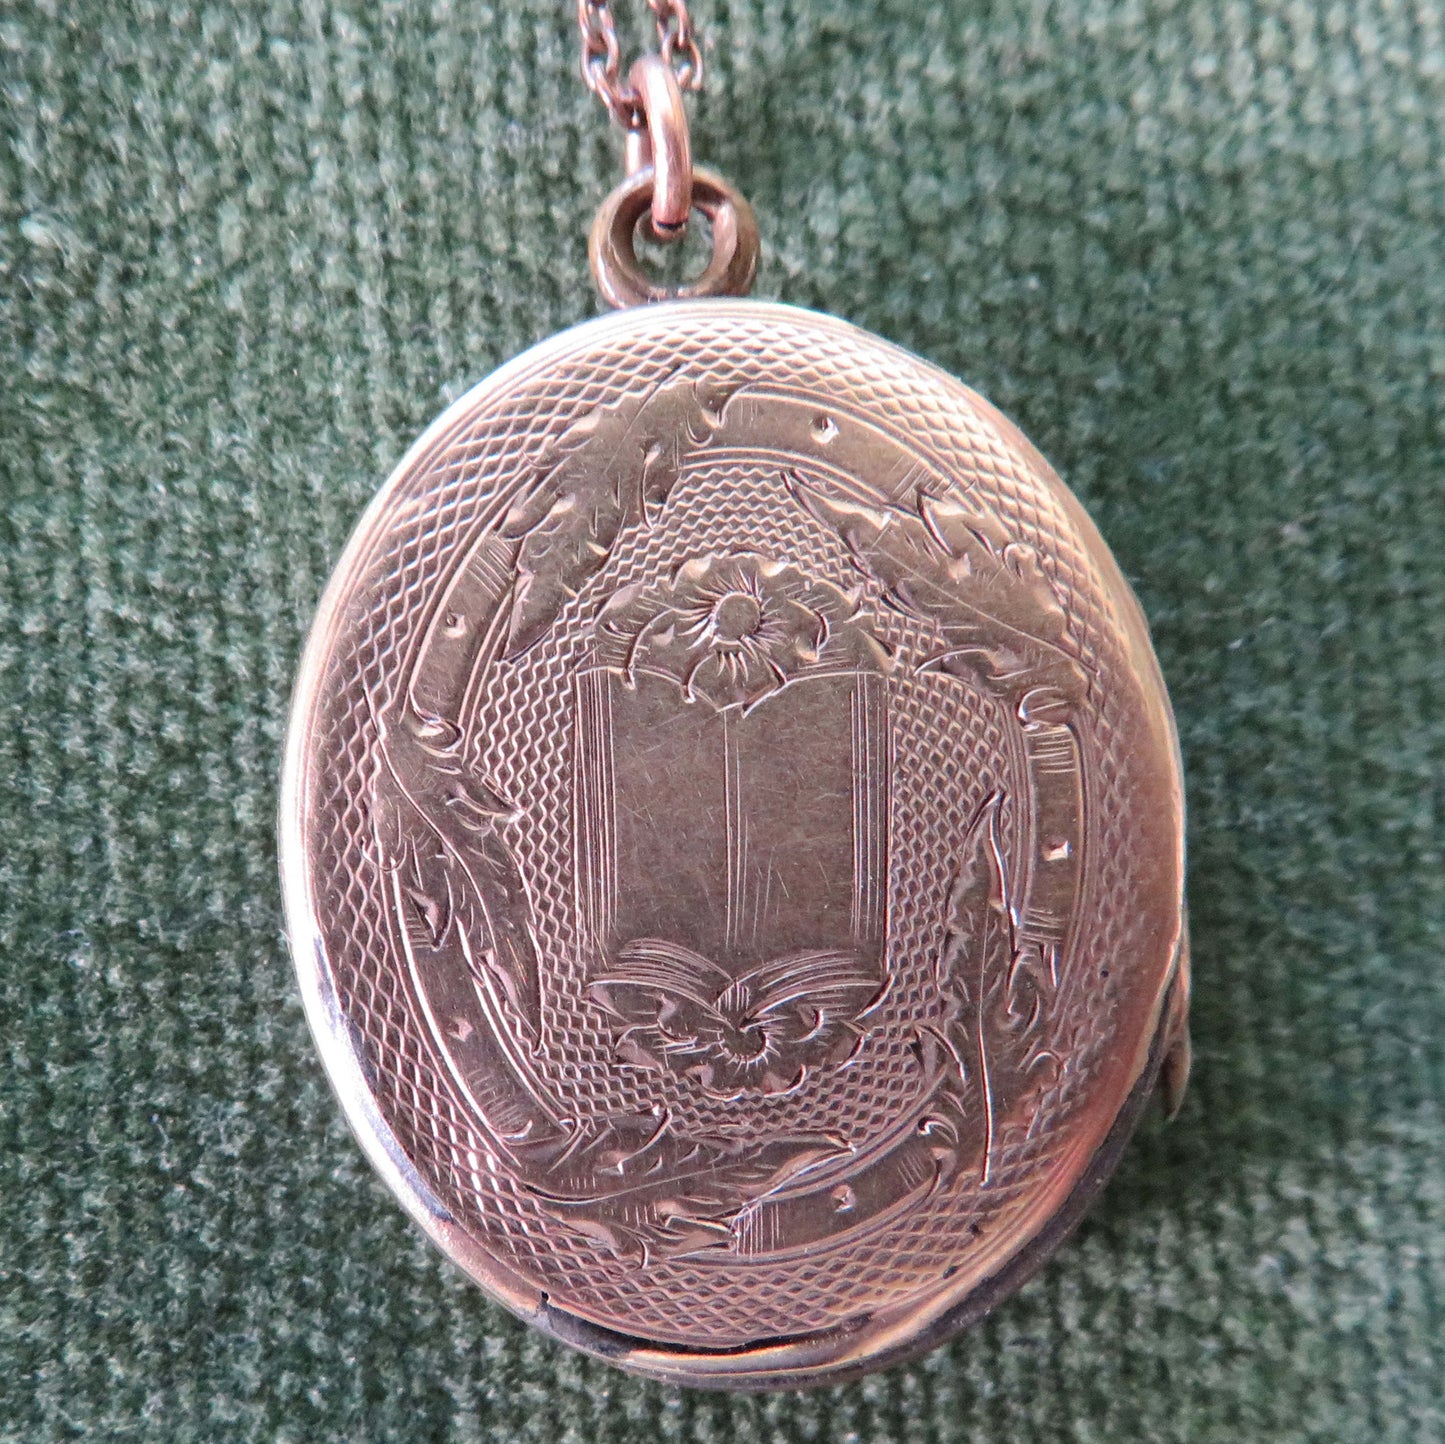 Unmarked Gold Oval Shaped Photo Locket Having A Horshoe Motif With Chain